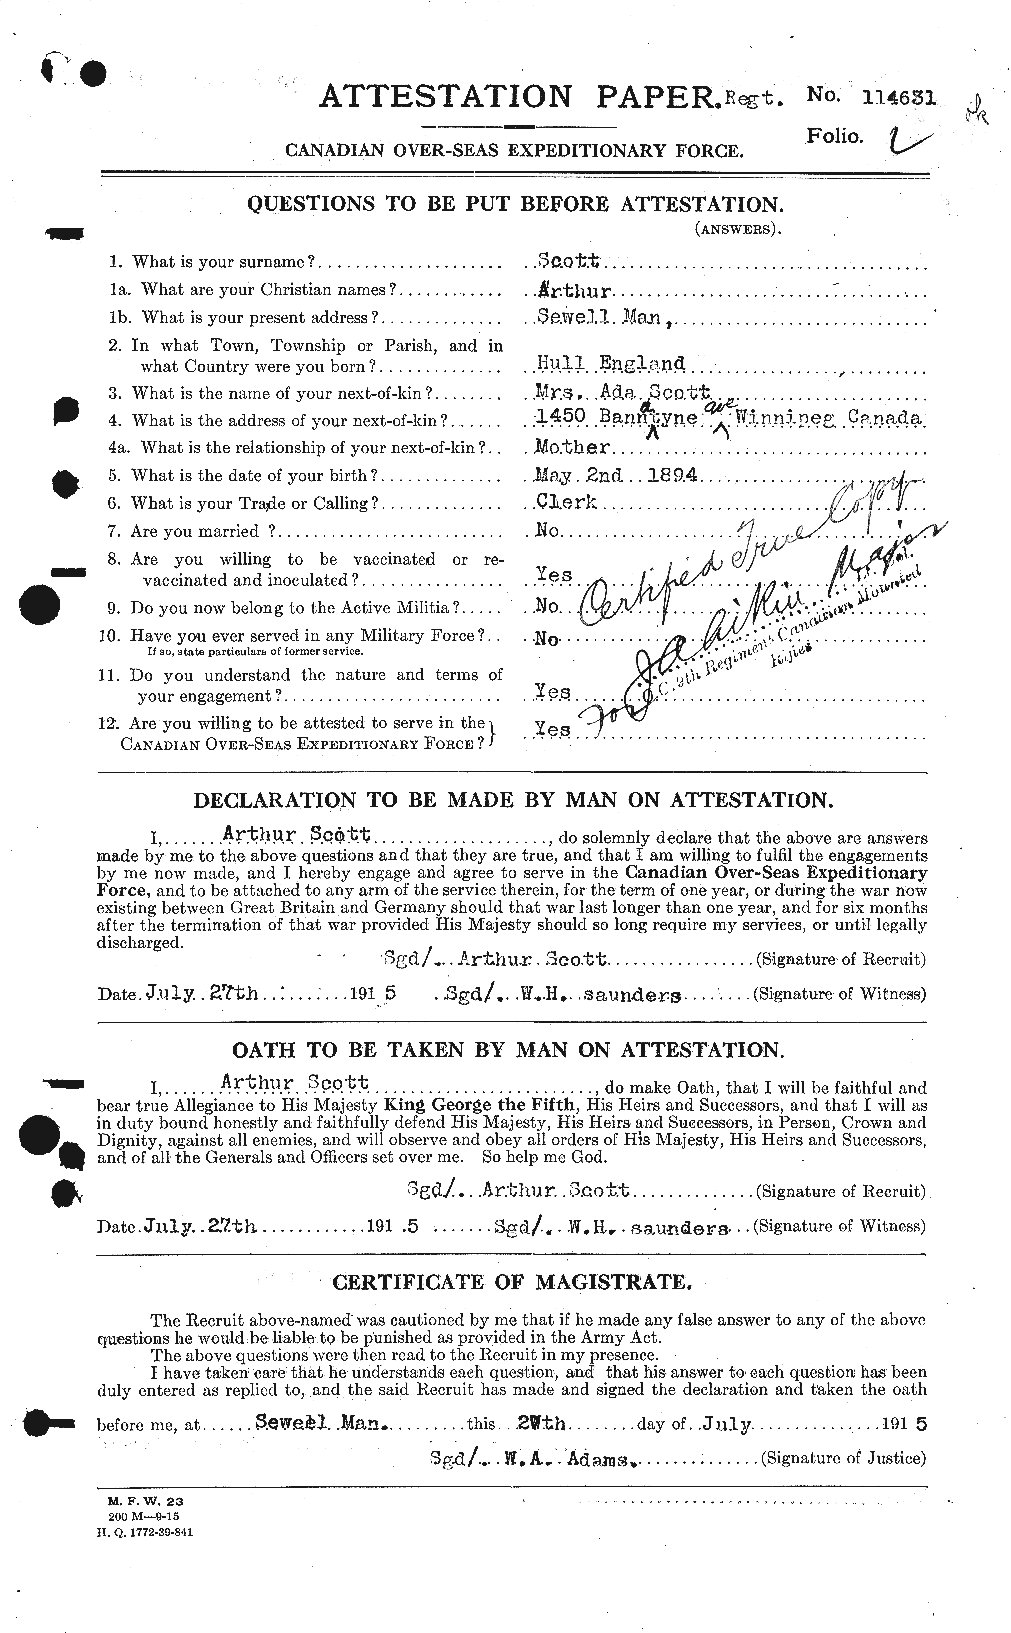 Personnel Records of the First World War - CEF 086416a